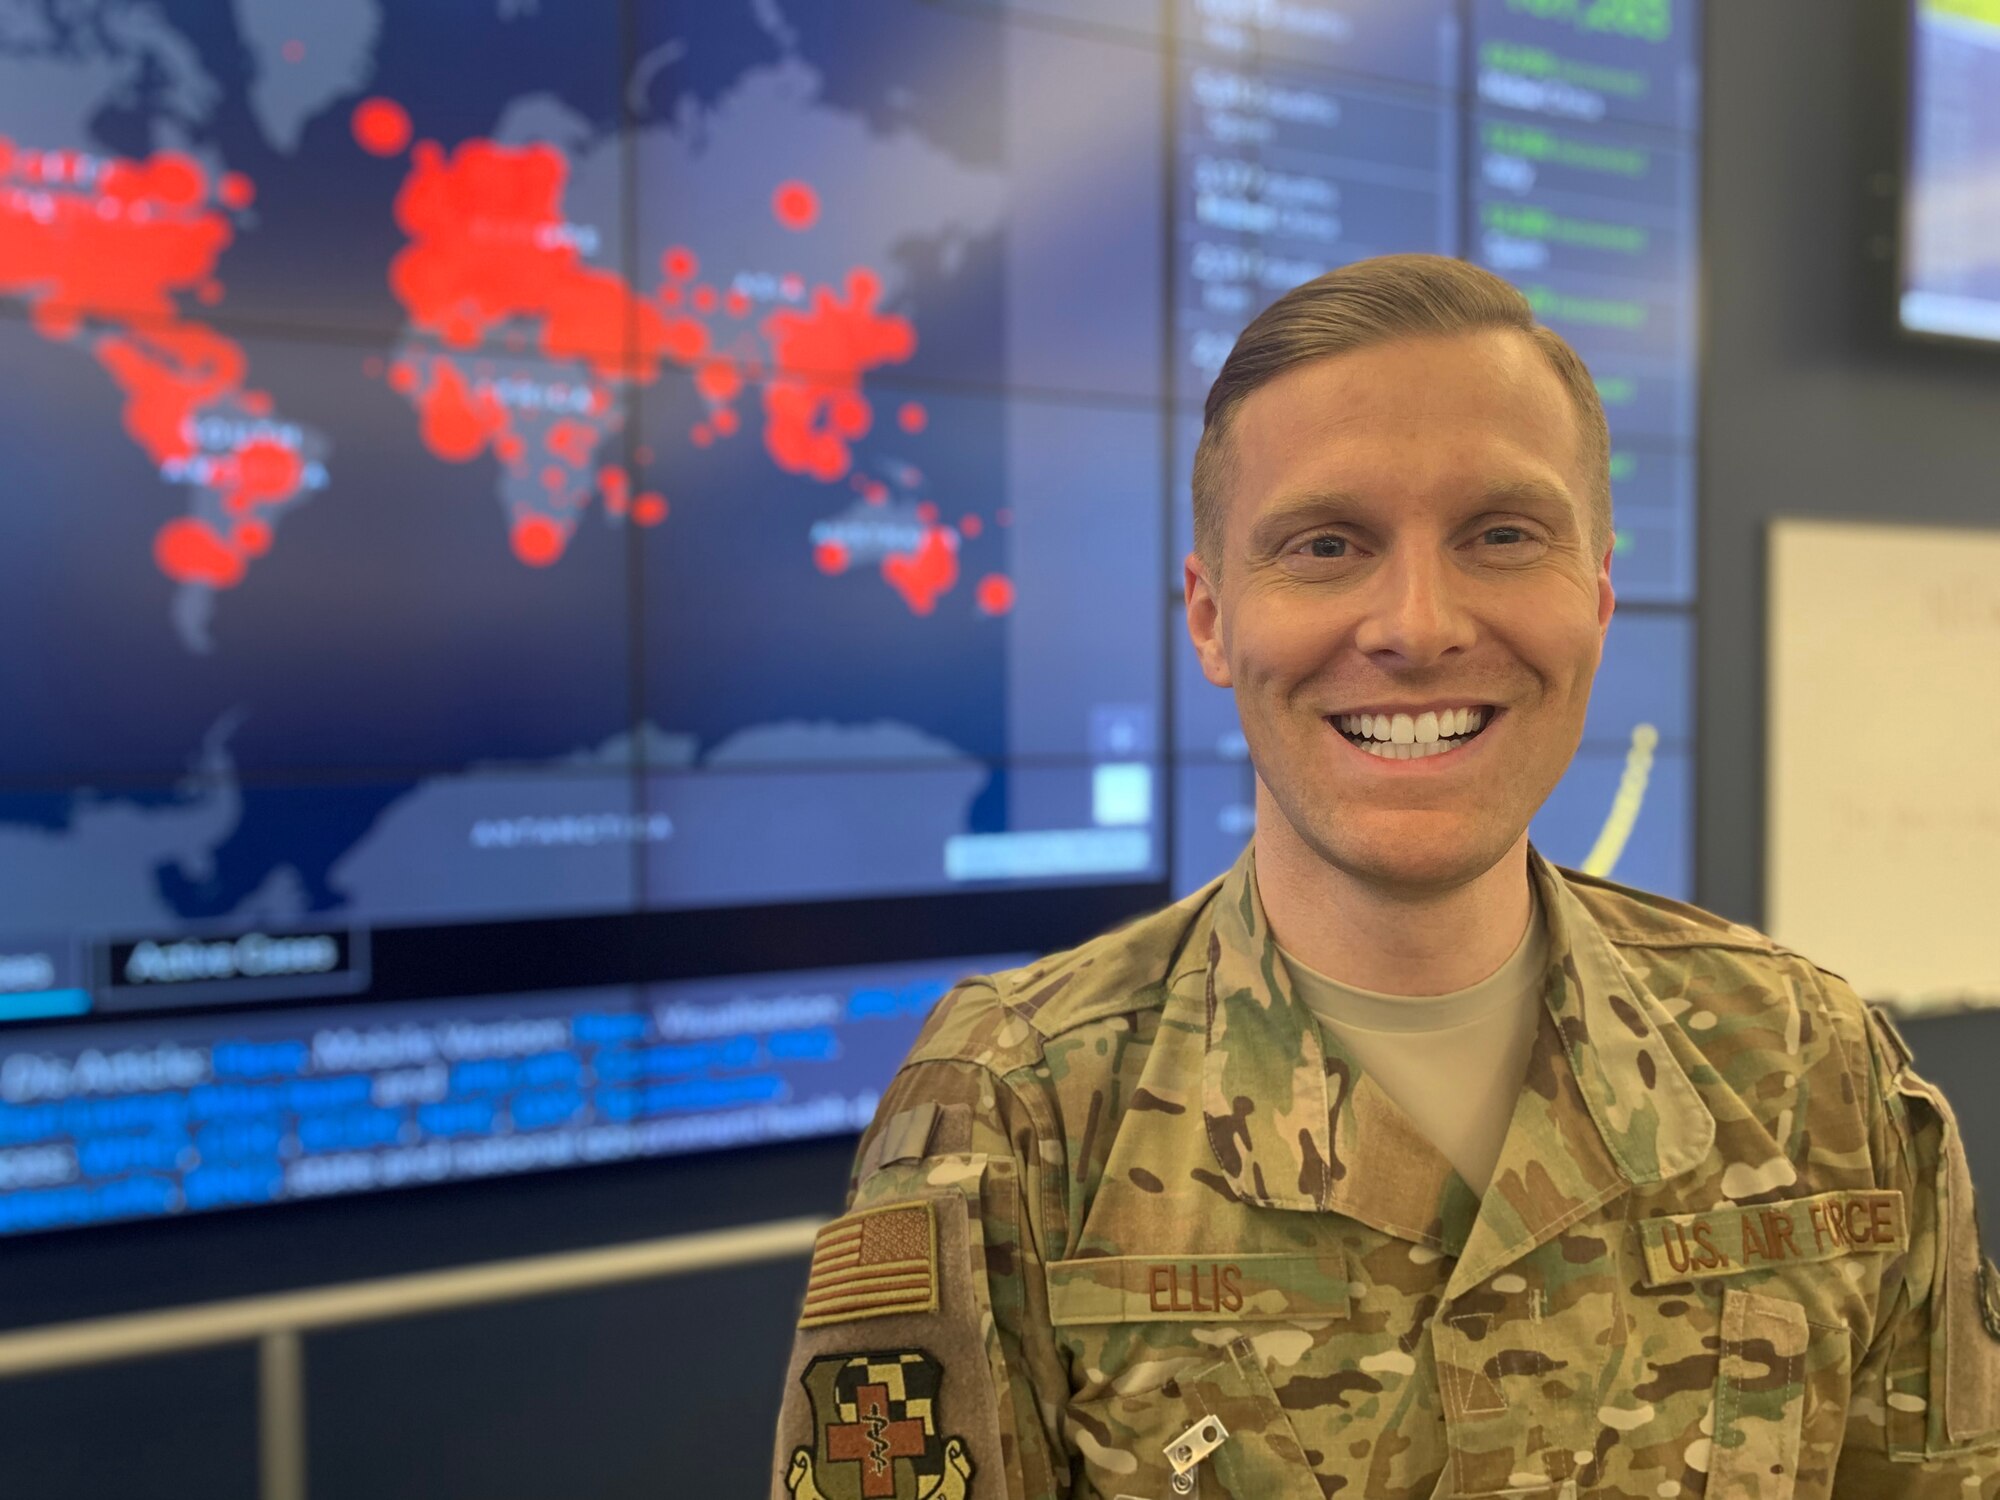 U.S. Air Force Capt. Brynt Ellis, medical readiness officer, 127th Medical Group, Selfridge Air National Guard Base, Michigan, works at the State Emergency Operations Center in response to the COVID-19 pandemic, Lansing, Mich., March 28, 2020.